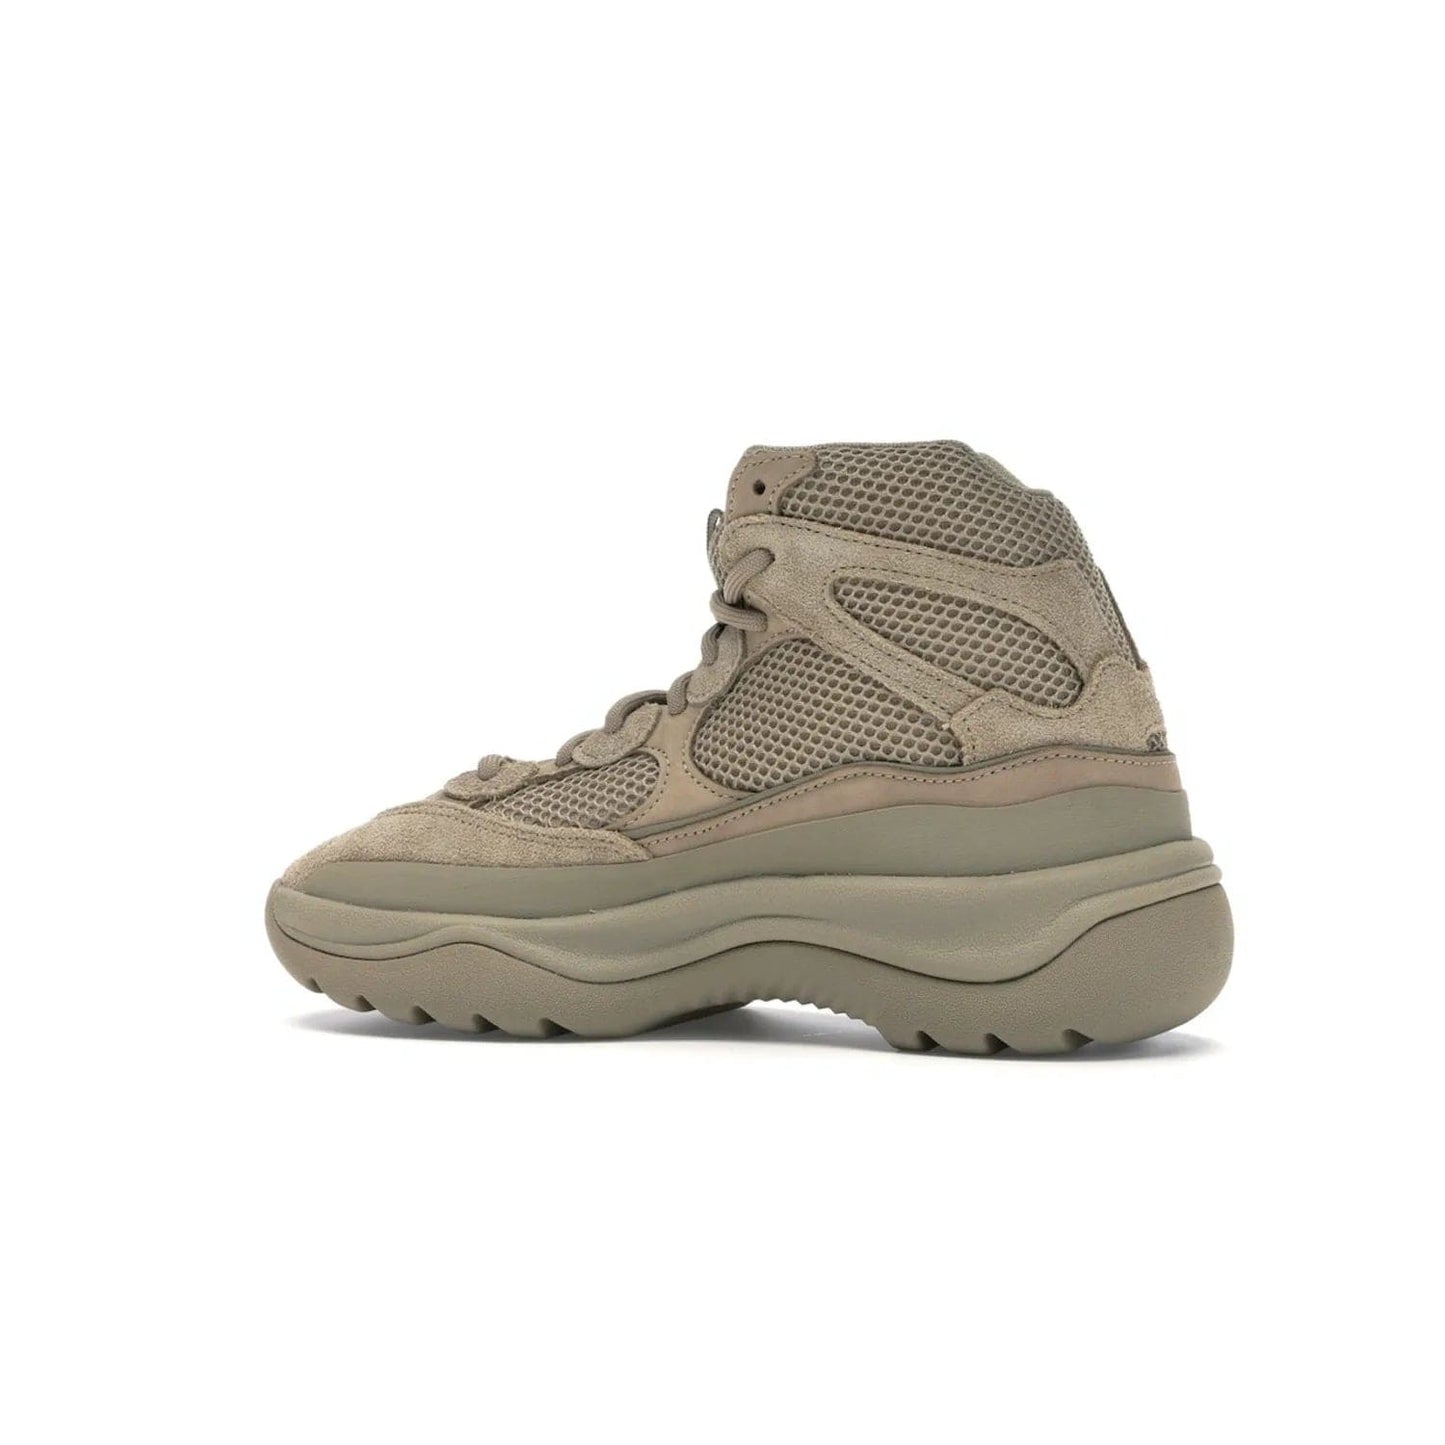 adidas Yeezy Desert Boot Rock - Image 21 - Only at www.BallersClubKickz.com - #
This season, make a fashion statement with the adidas Yeezy Desert Boot Rock. Nubuck and suede upper offers tonal style while the grooved sole provides traction and stability. Get yours in April 2019.